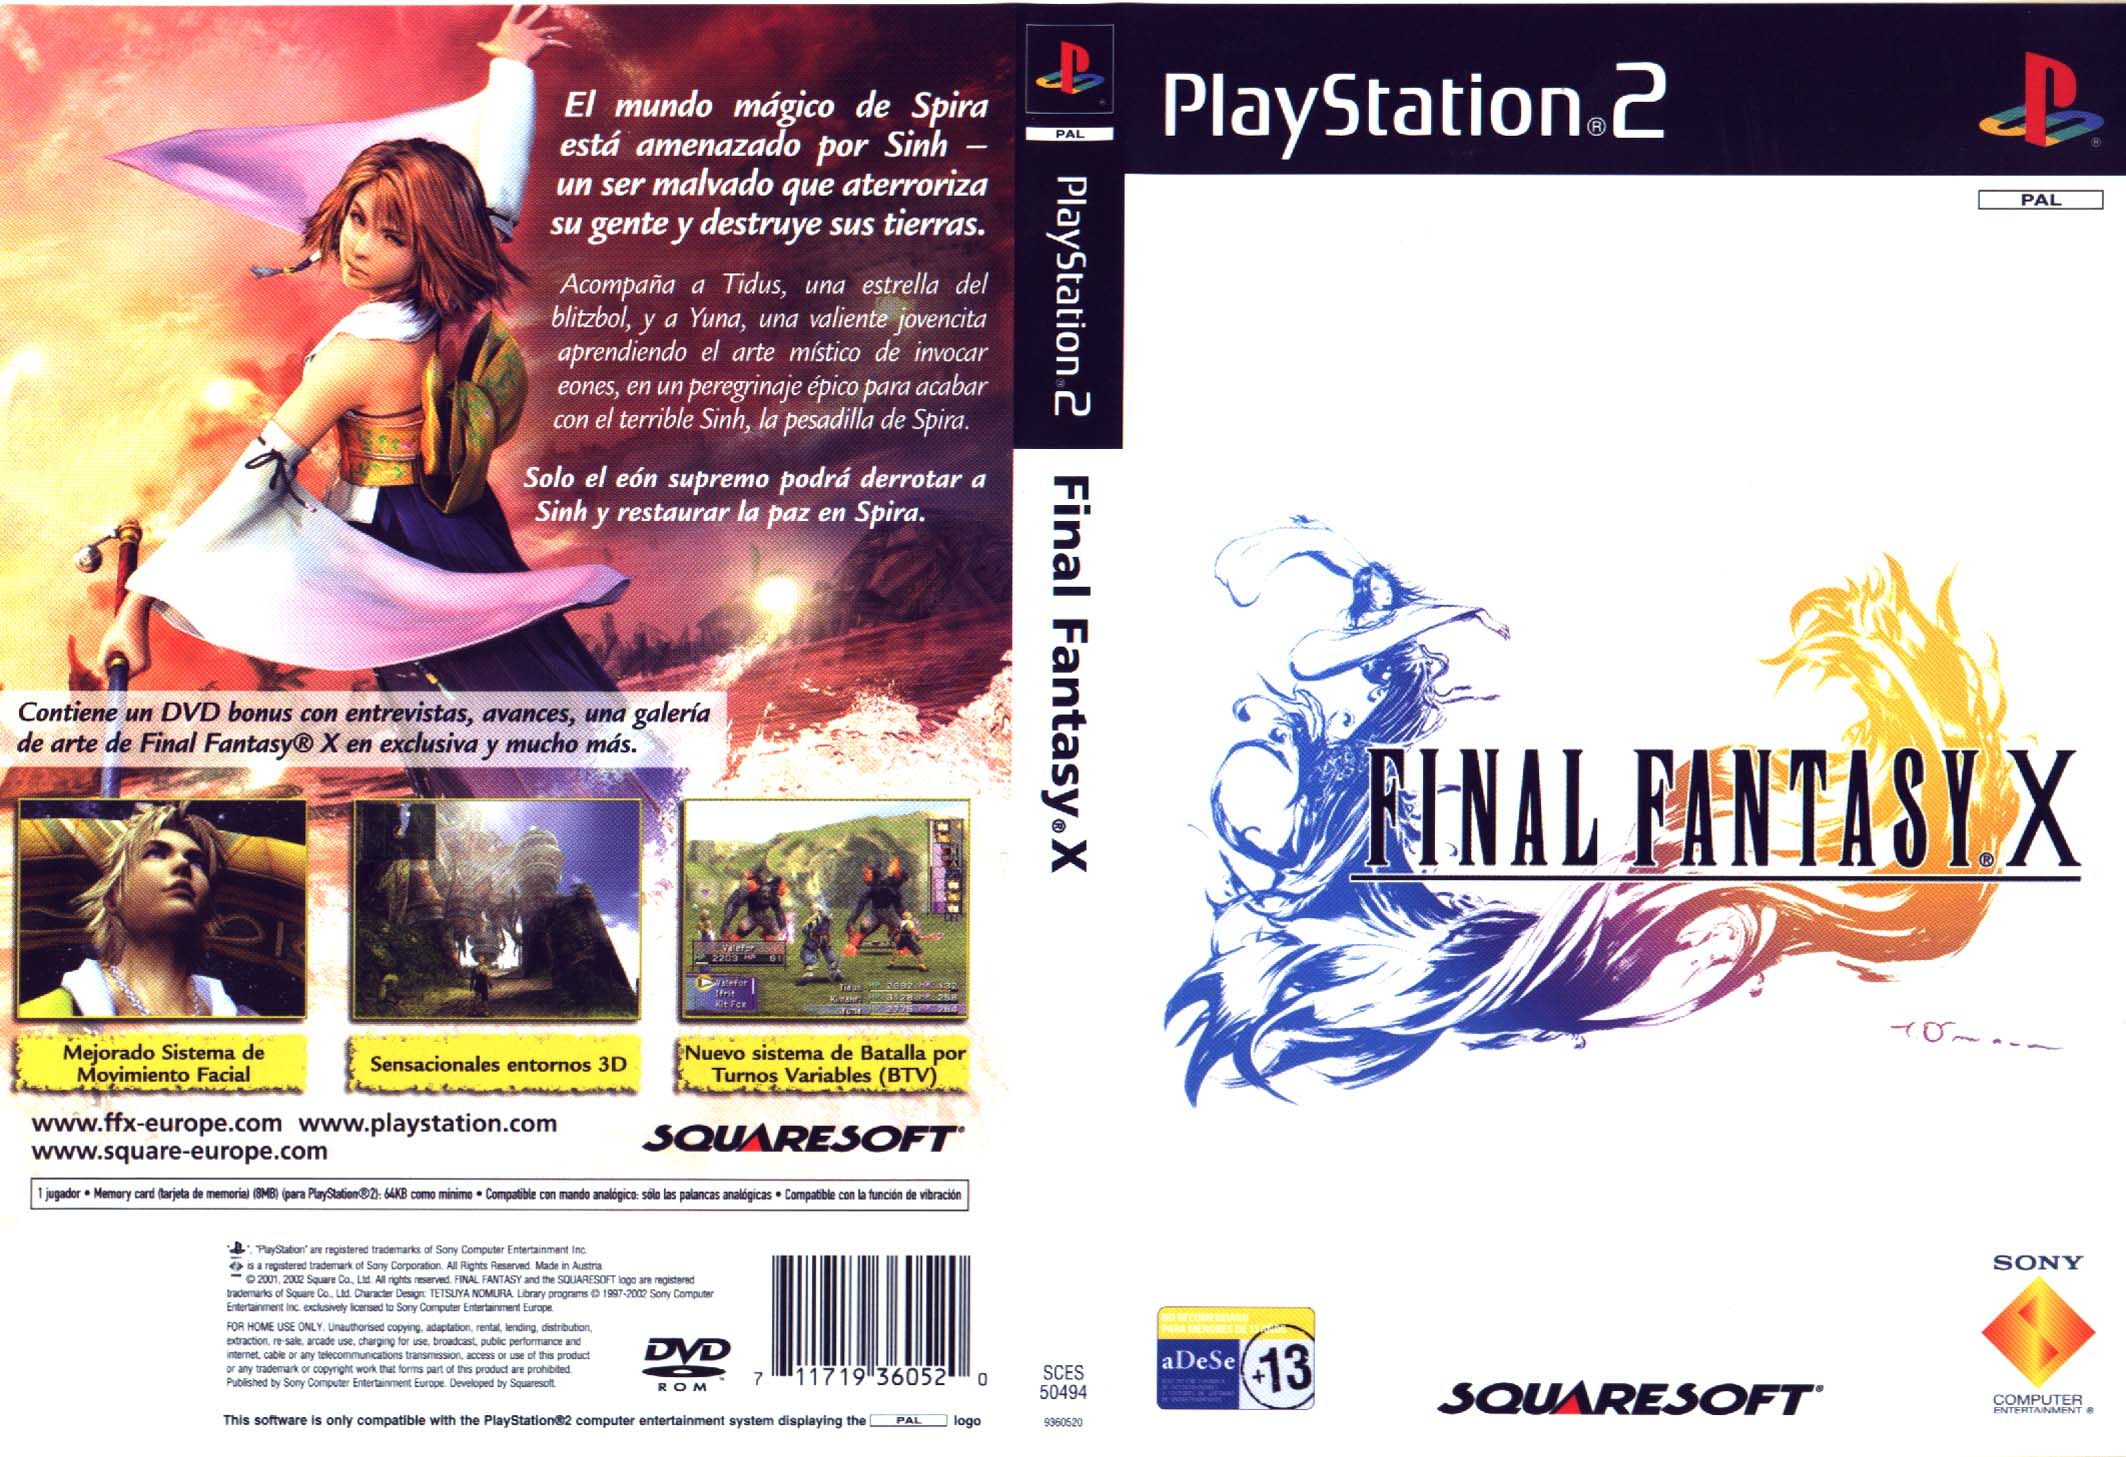 Final Fantasy X ROM Download - Sony PlayStation 2(PS2)